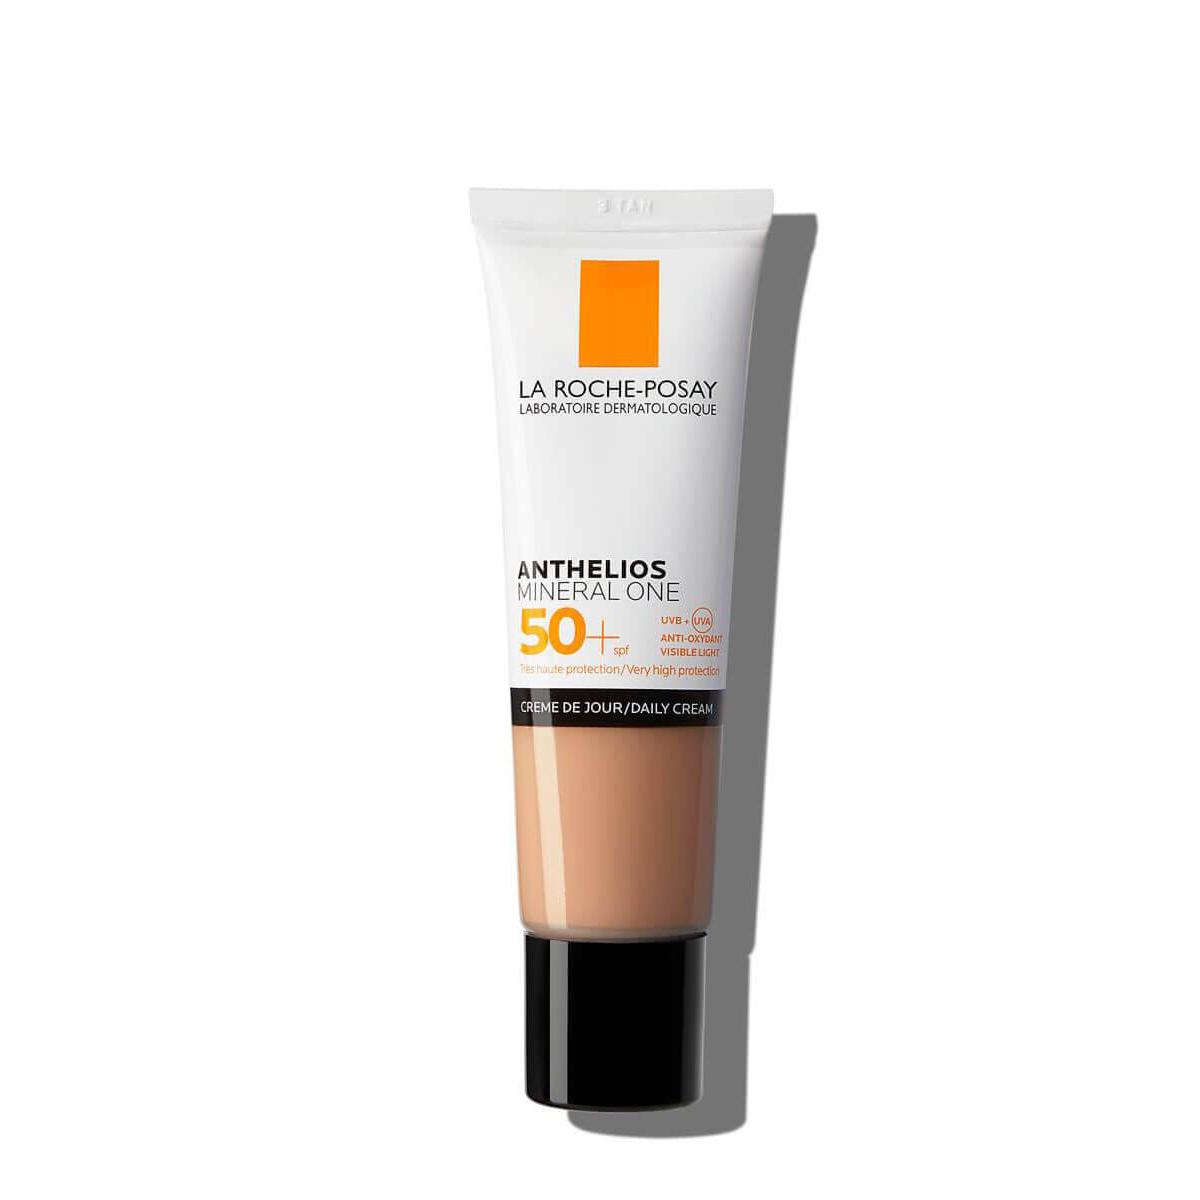 Anthelios - La roche posay anthelios mineral one color 03 bronze spf50+ 30 ml